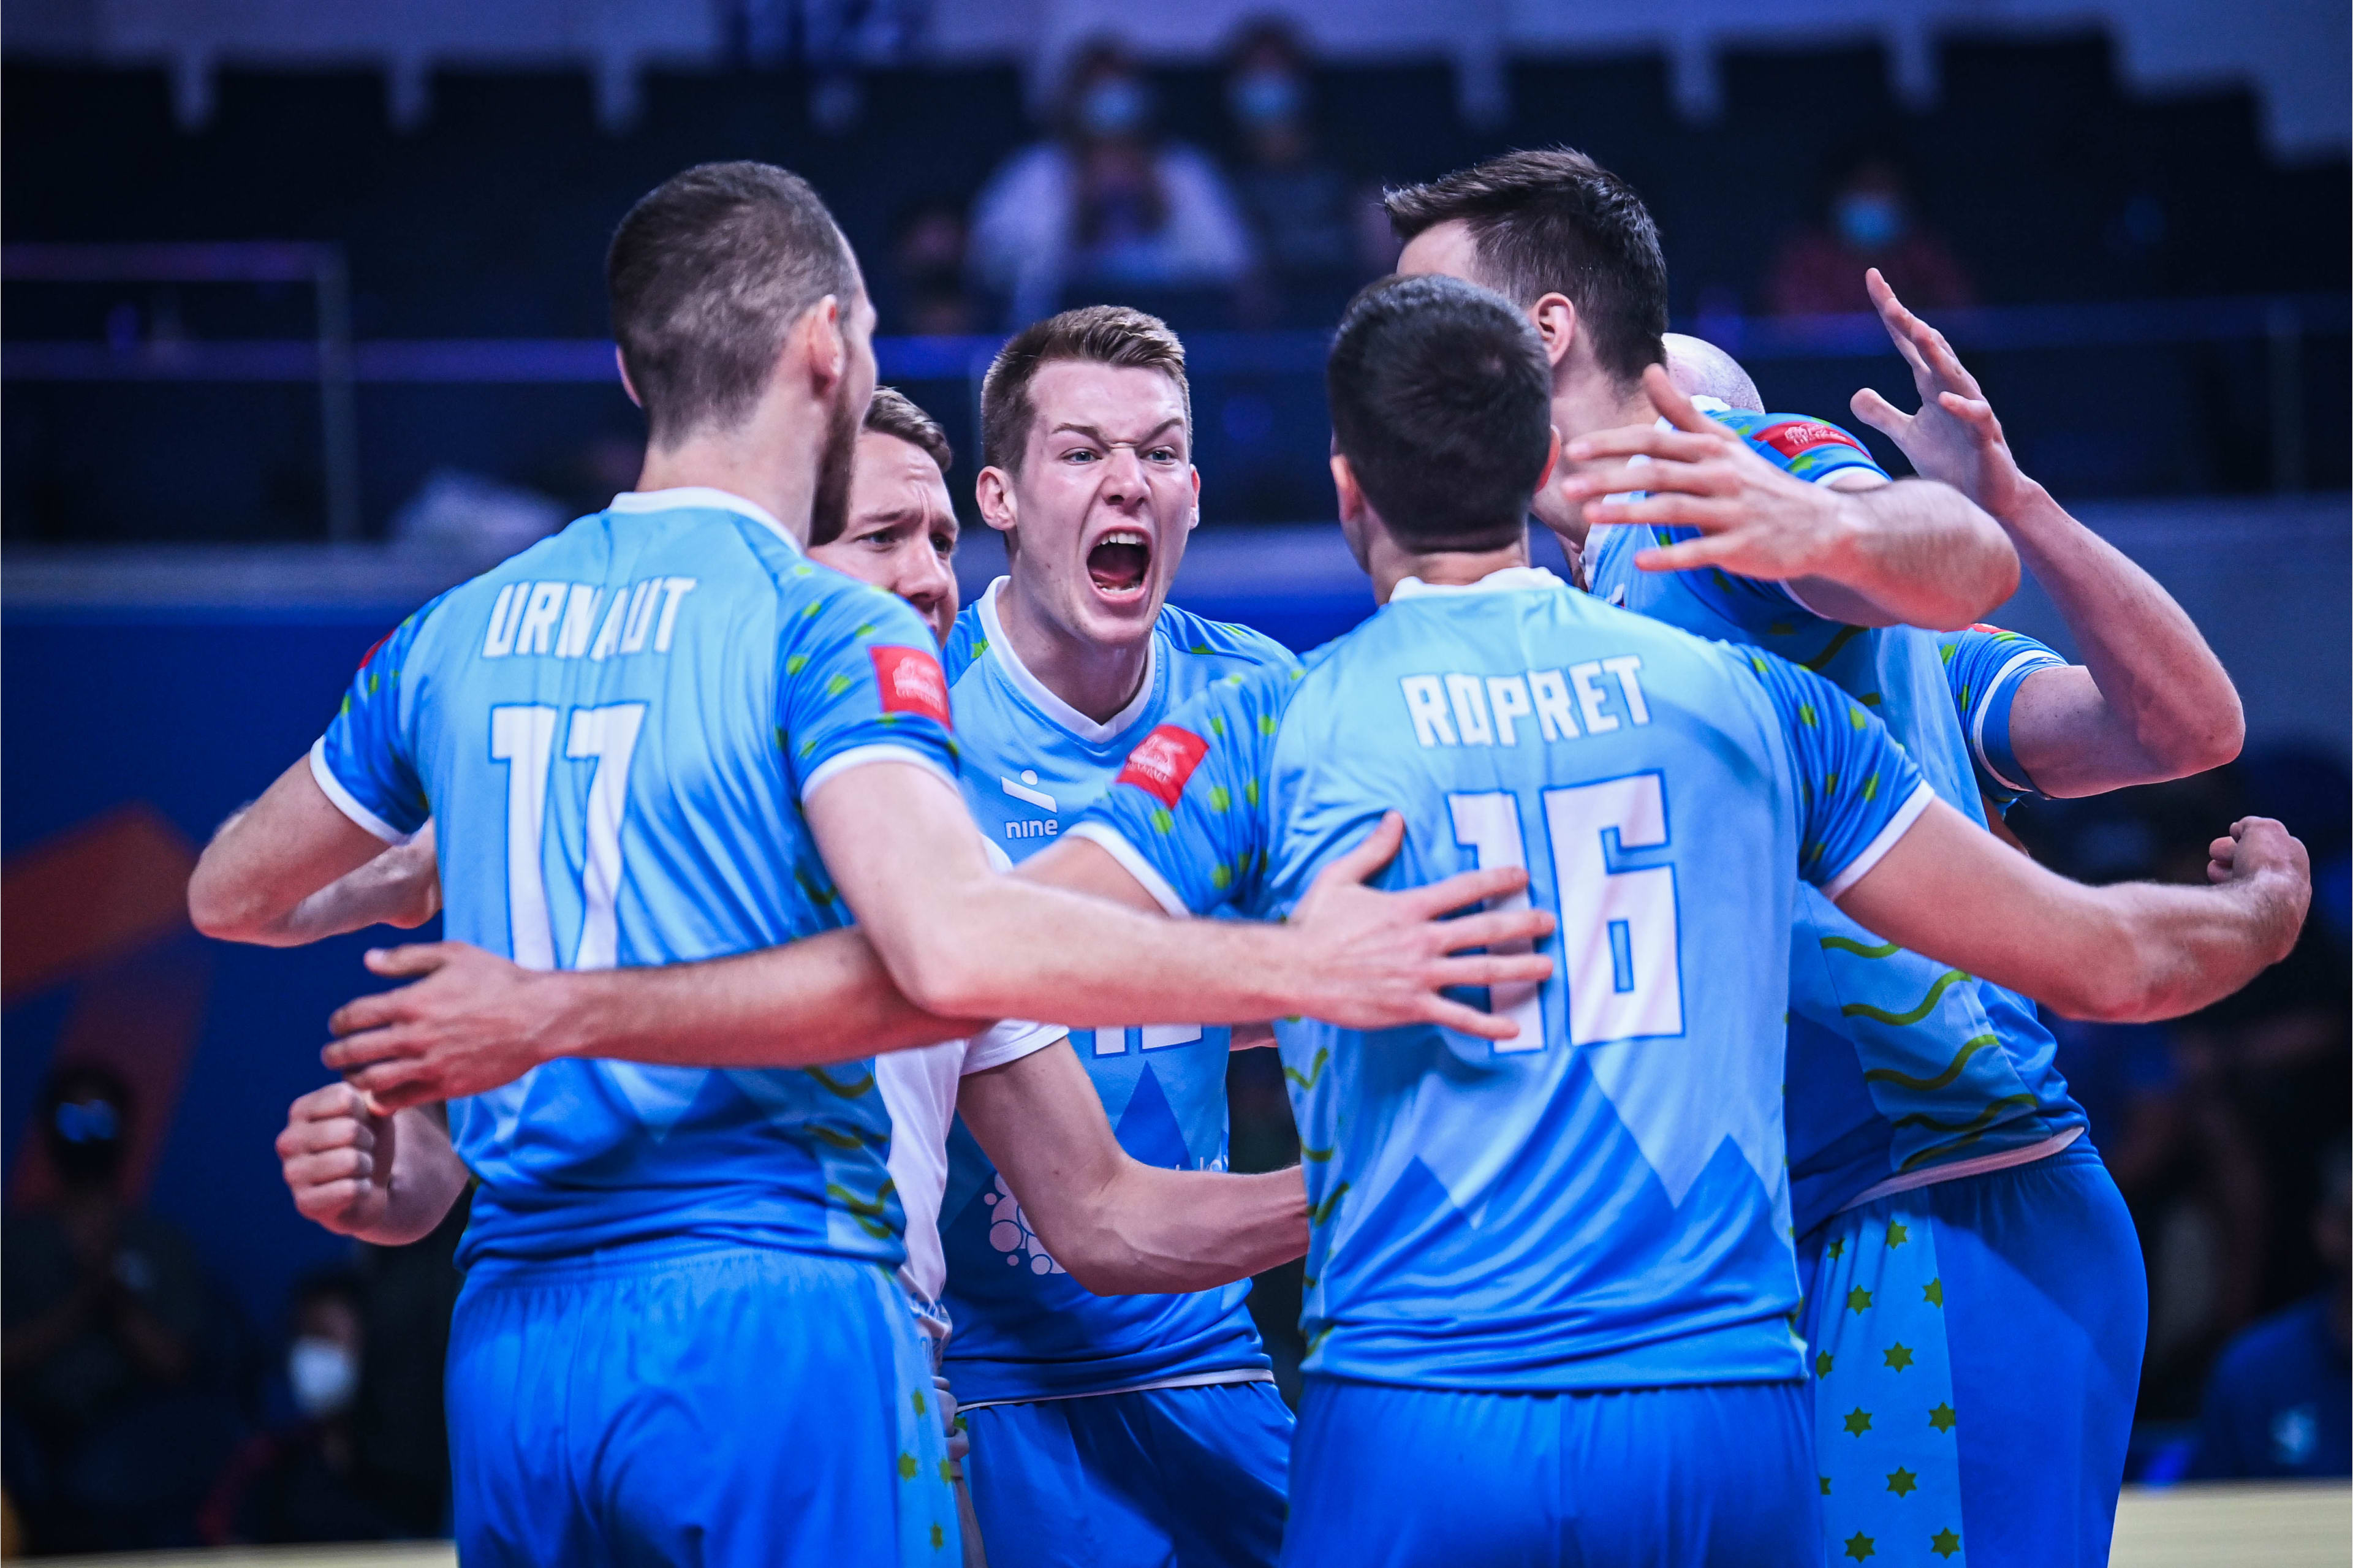 Match schedule released for newlook FIVB Volleyball Men’s World